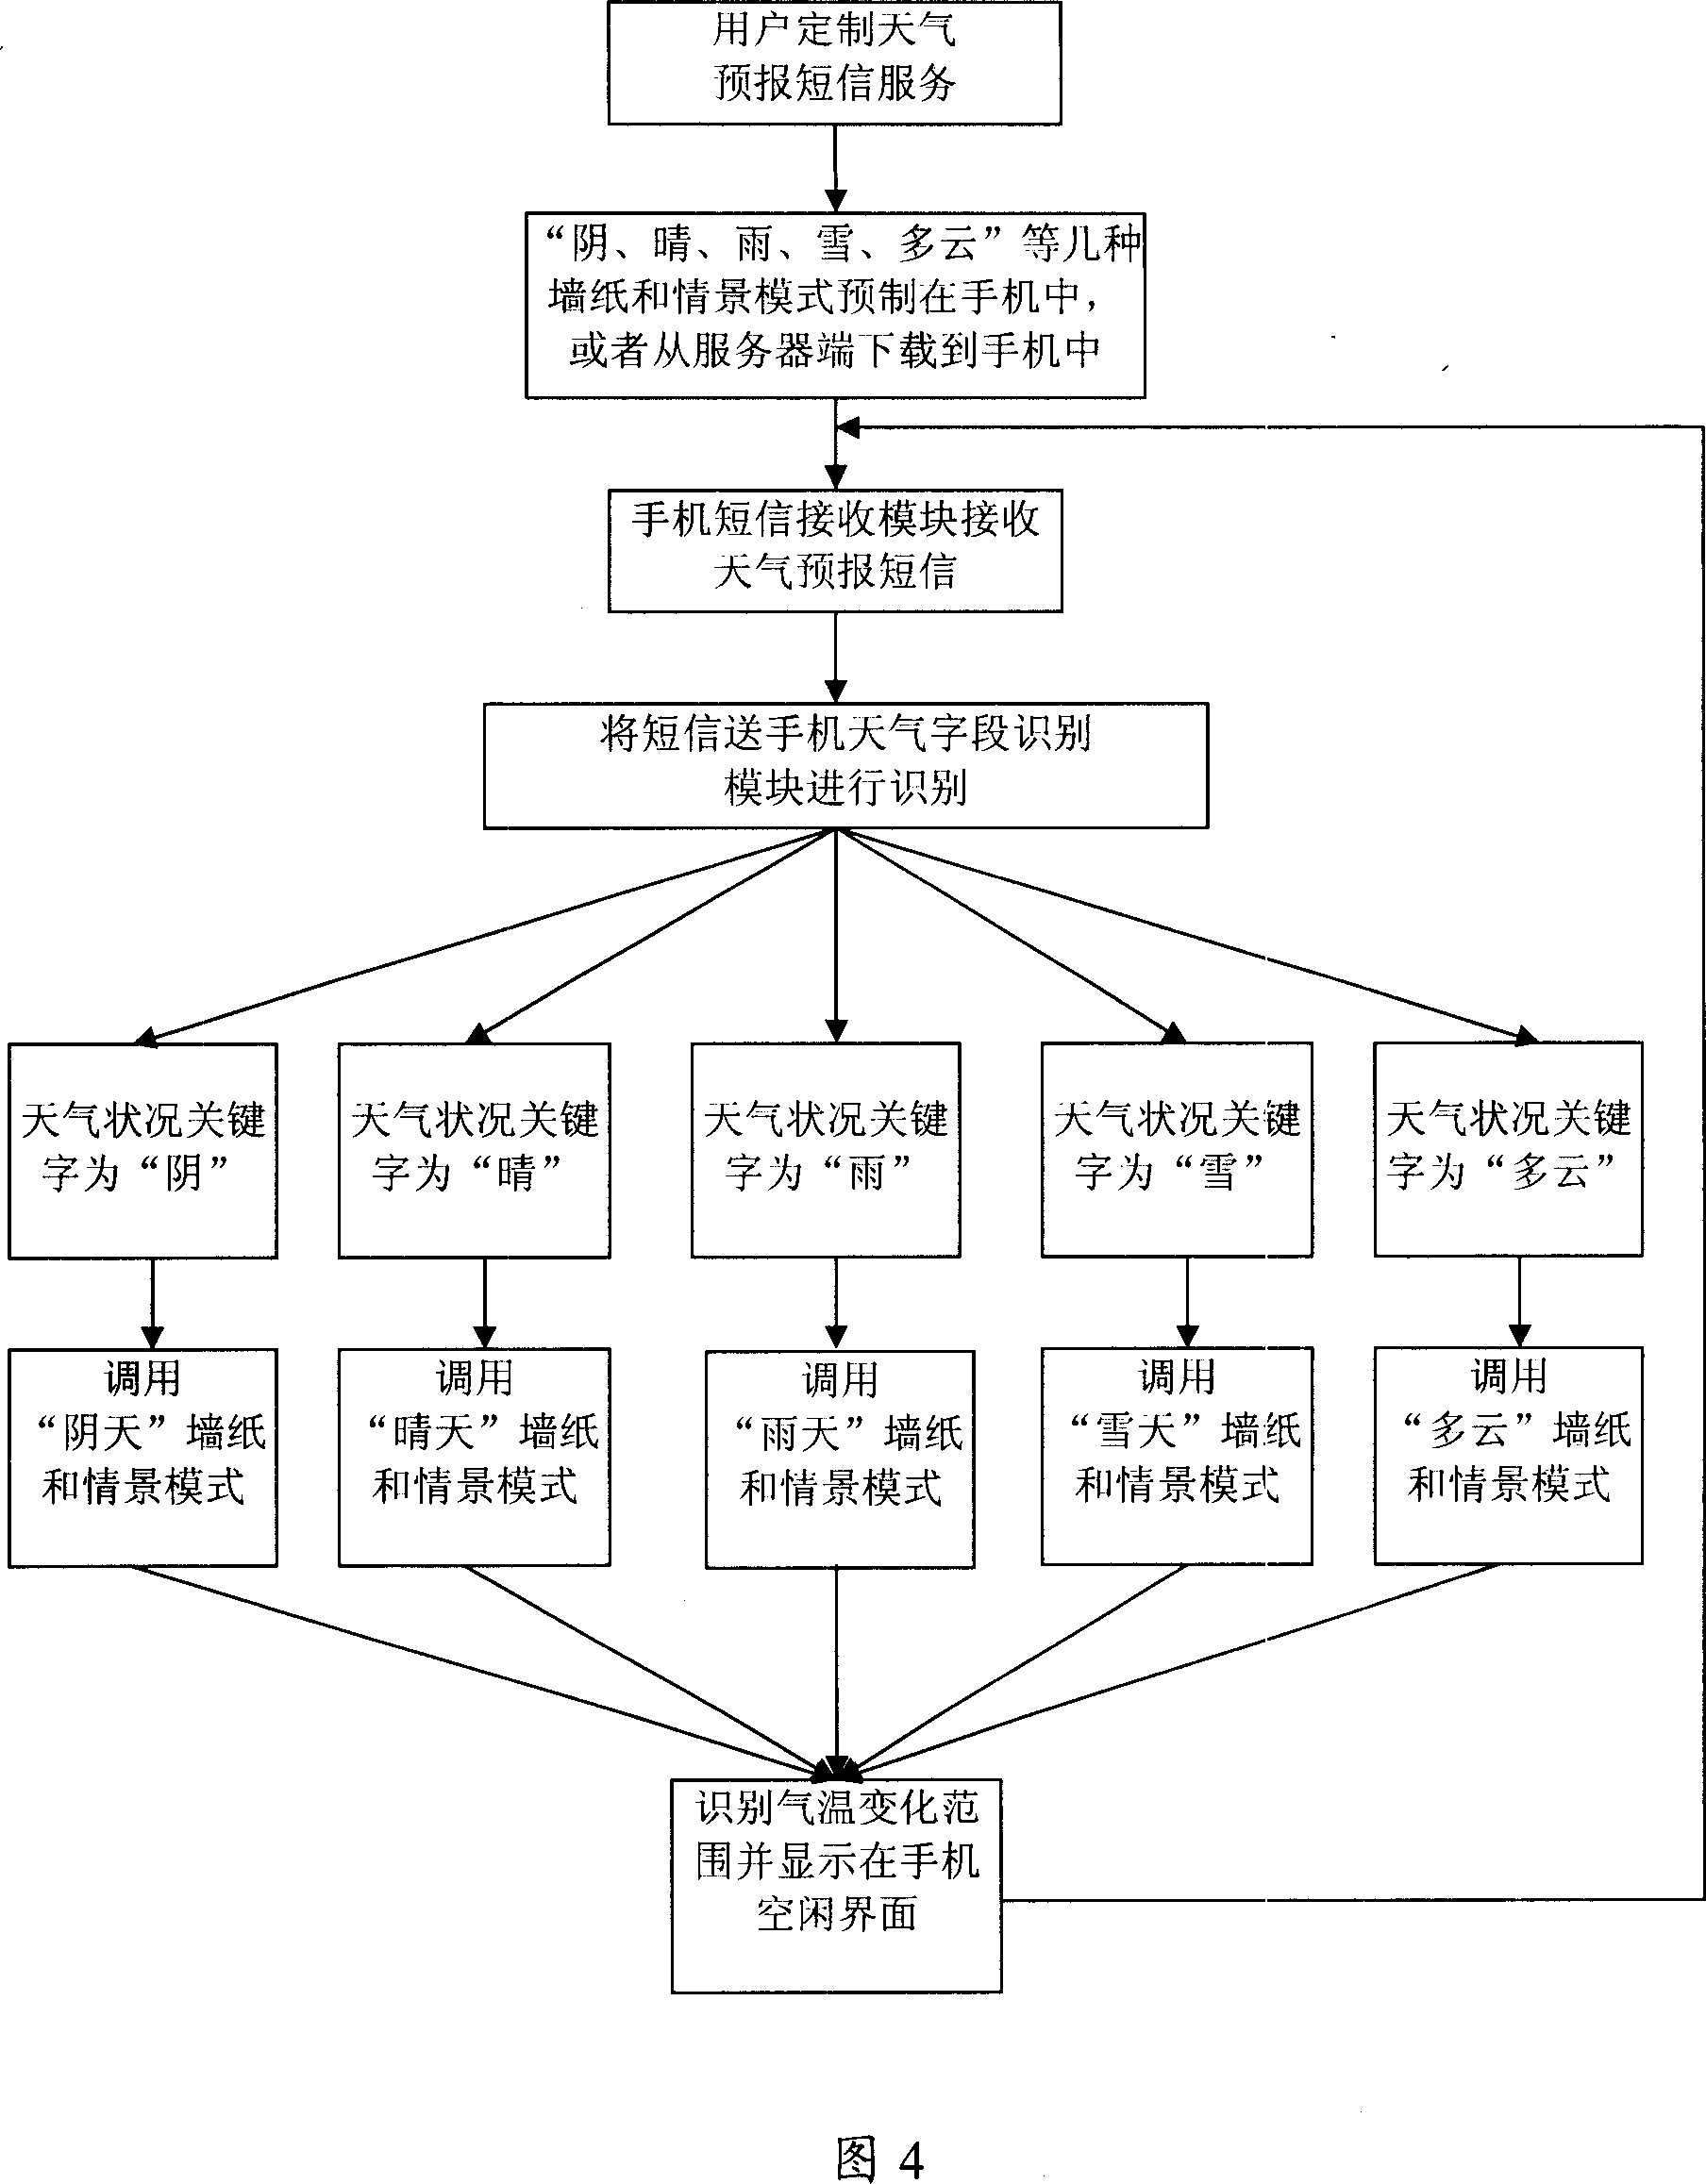 User terminal to automatically change wall paper and/or topic mode and its realization method